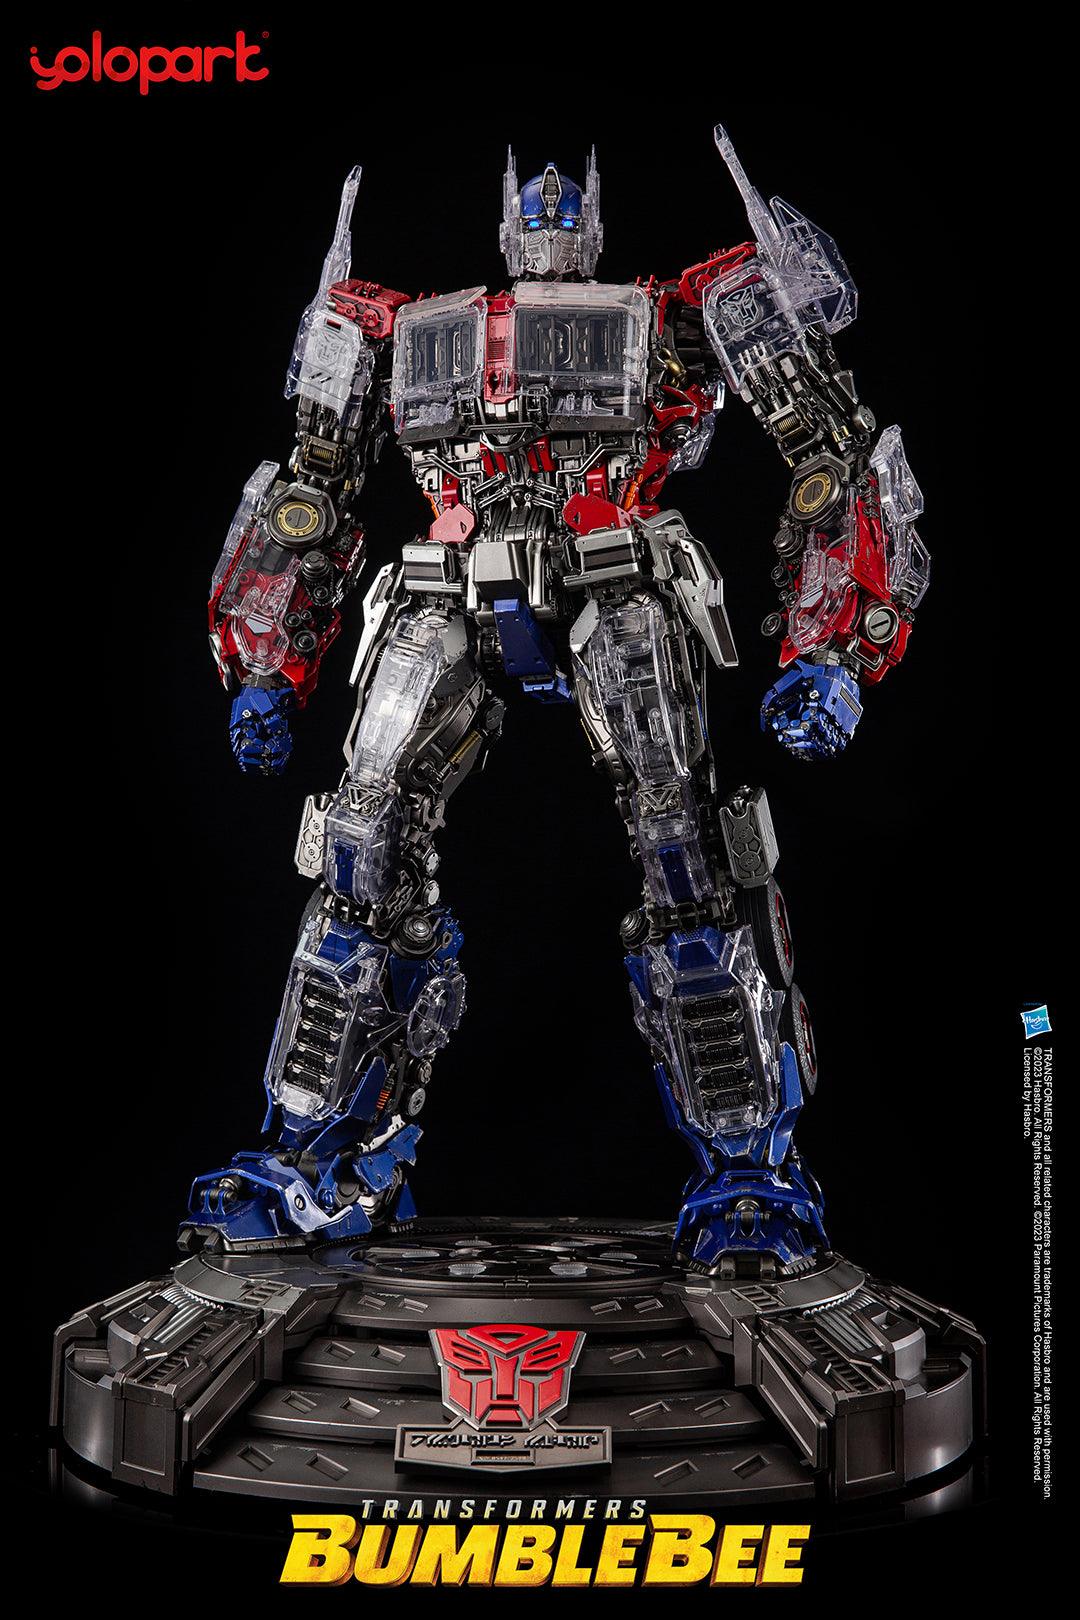 BUMBLEBEE THE MOVIE : IIES 24" Cybertron Optimus Prime - Deluxe Version (DEPOSIT PAYMENT)